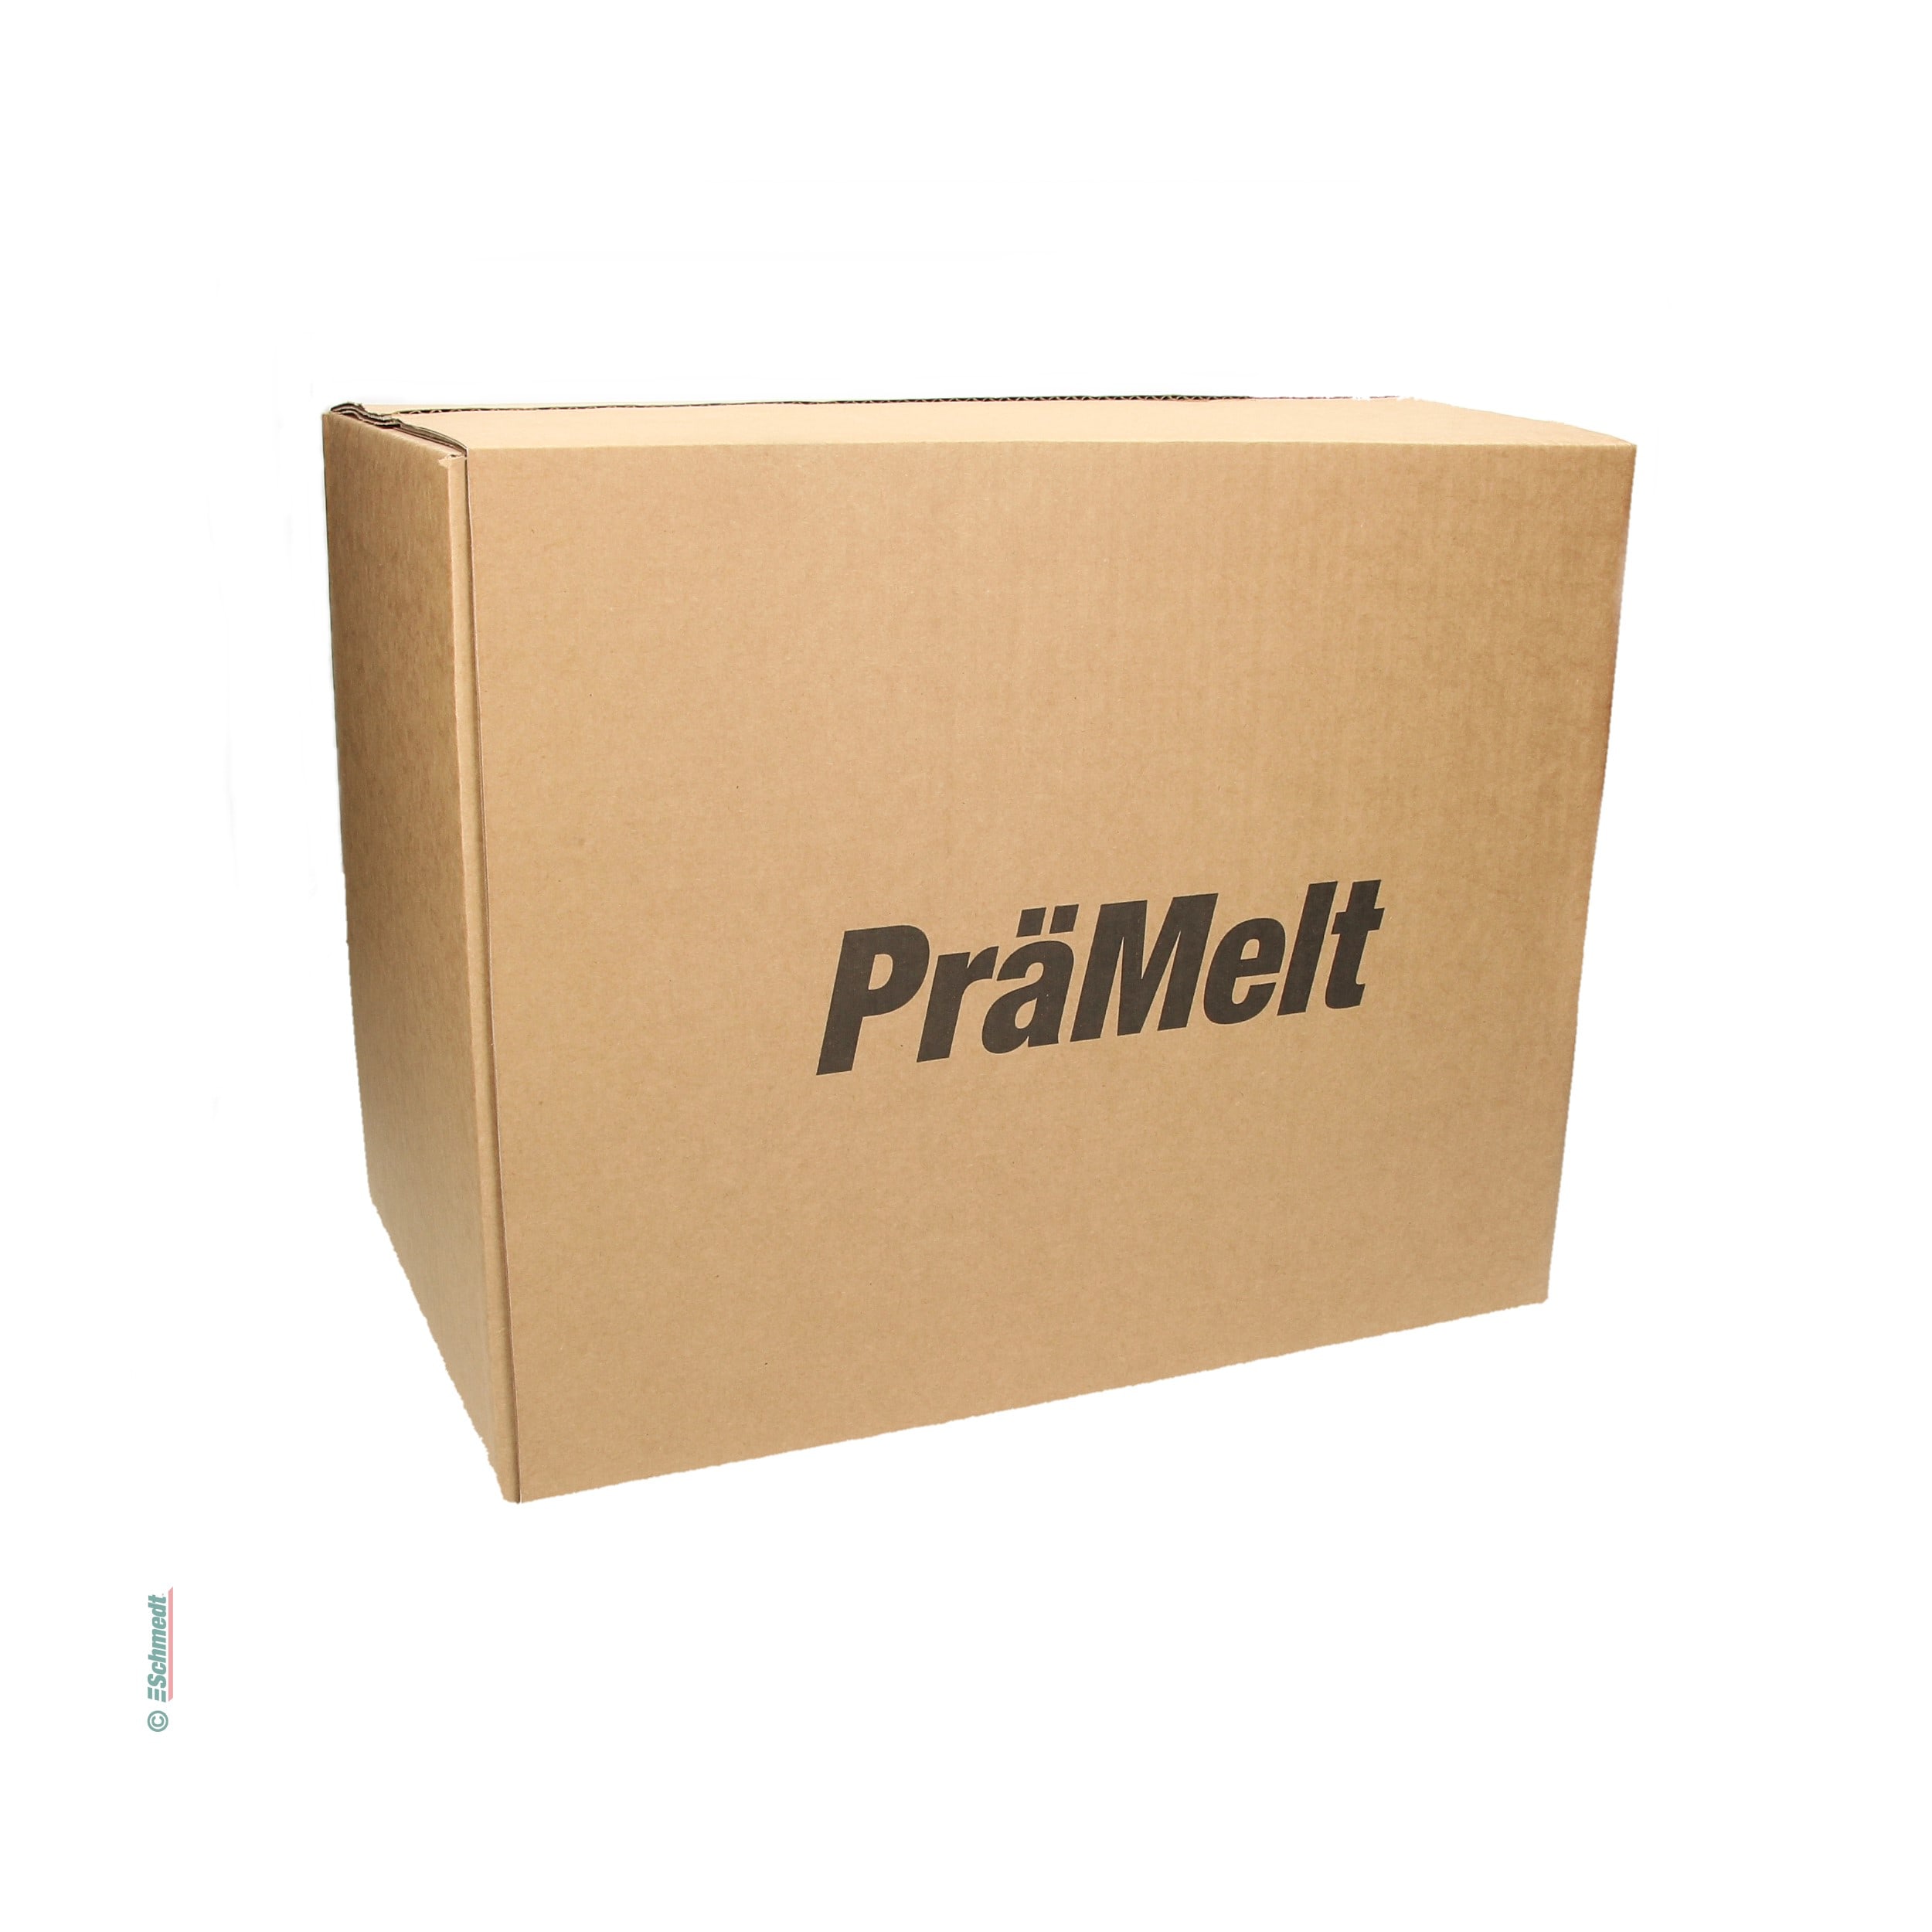 PräMelt OT24 Digital - Hotmelt jelly - PE bag of approx. 2.5 kgs - especially suitable for digitally printed covers and genuine photo papers... - image-1